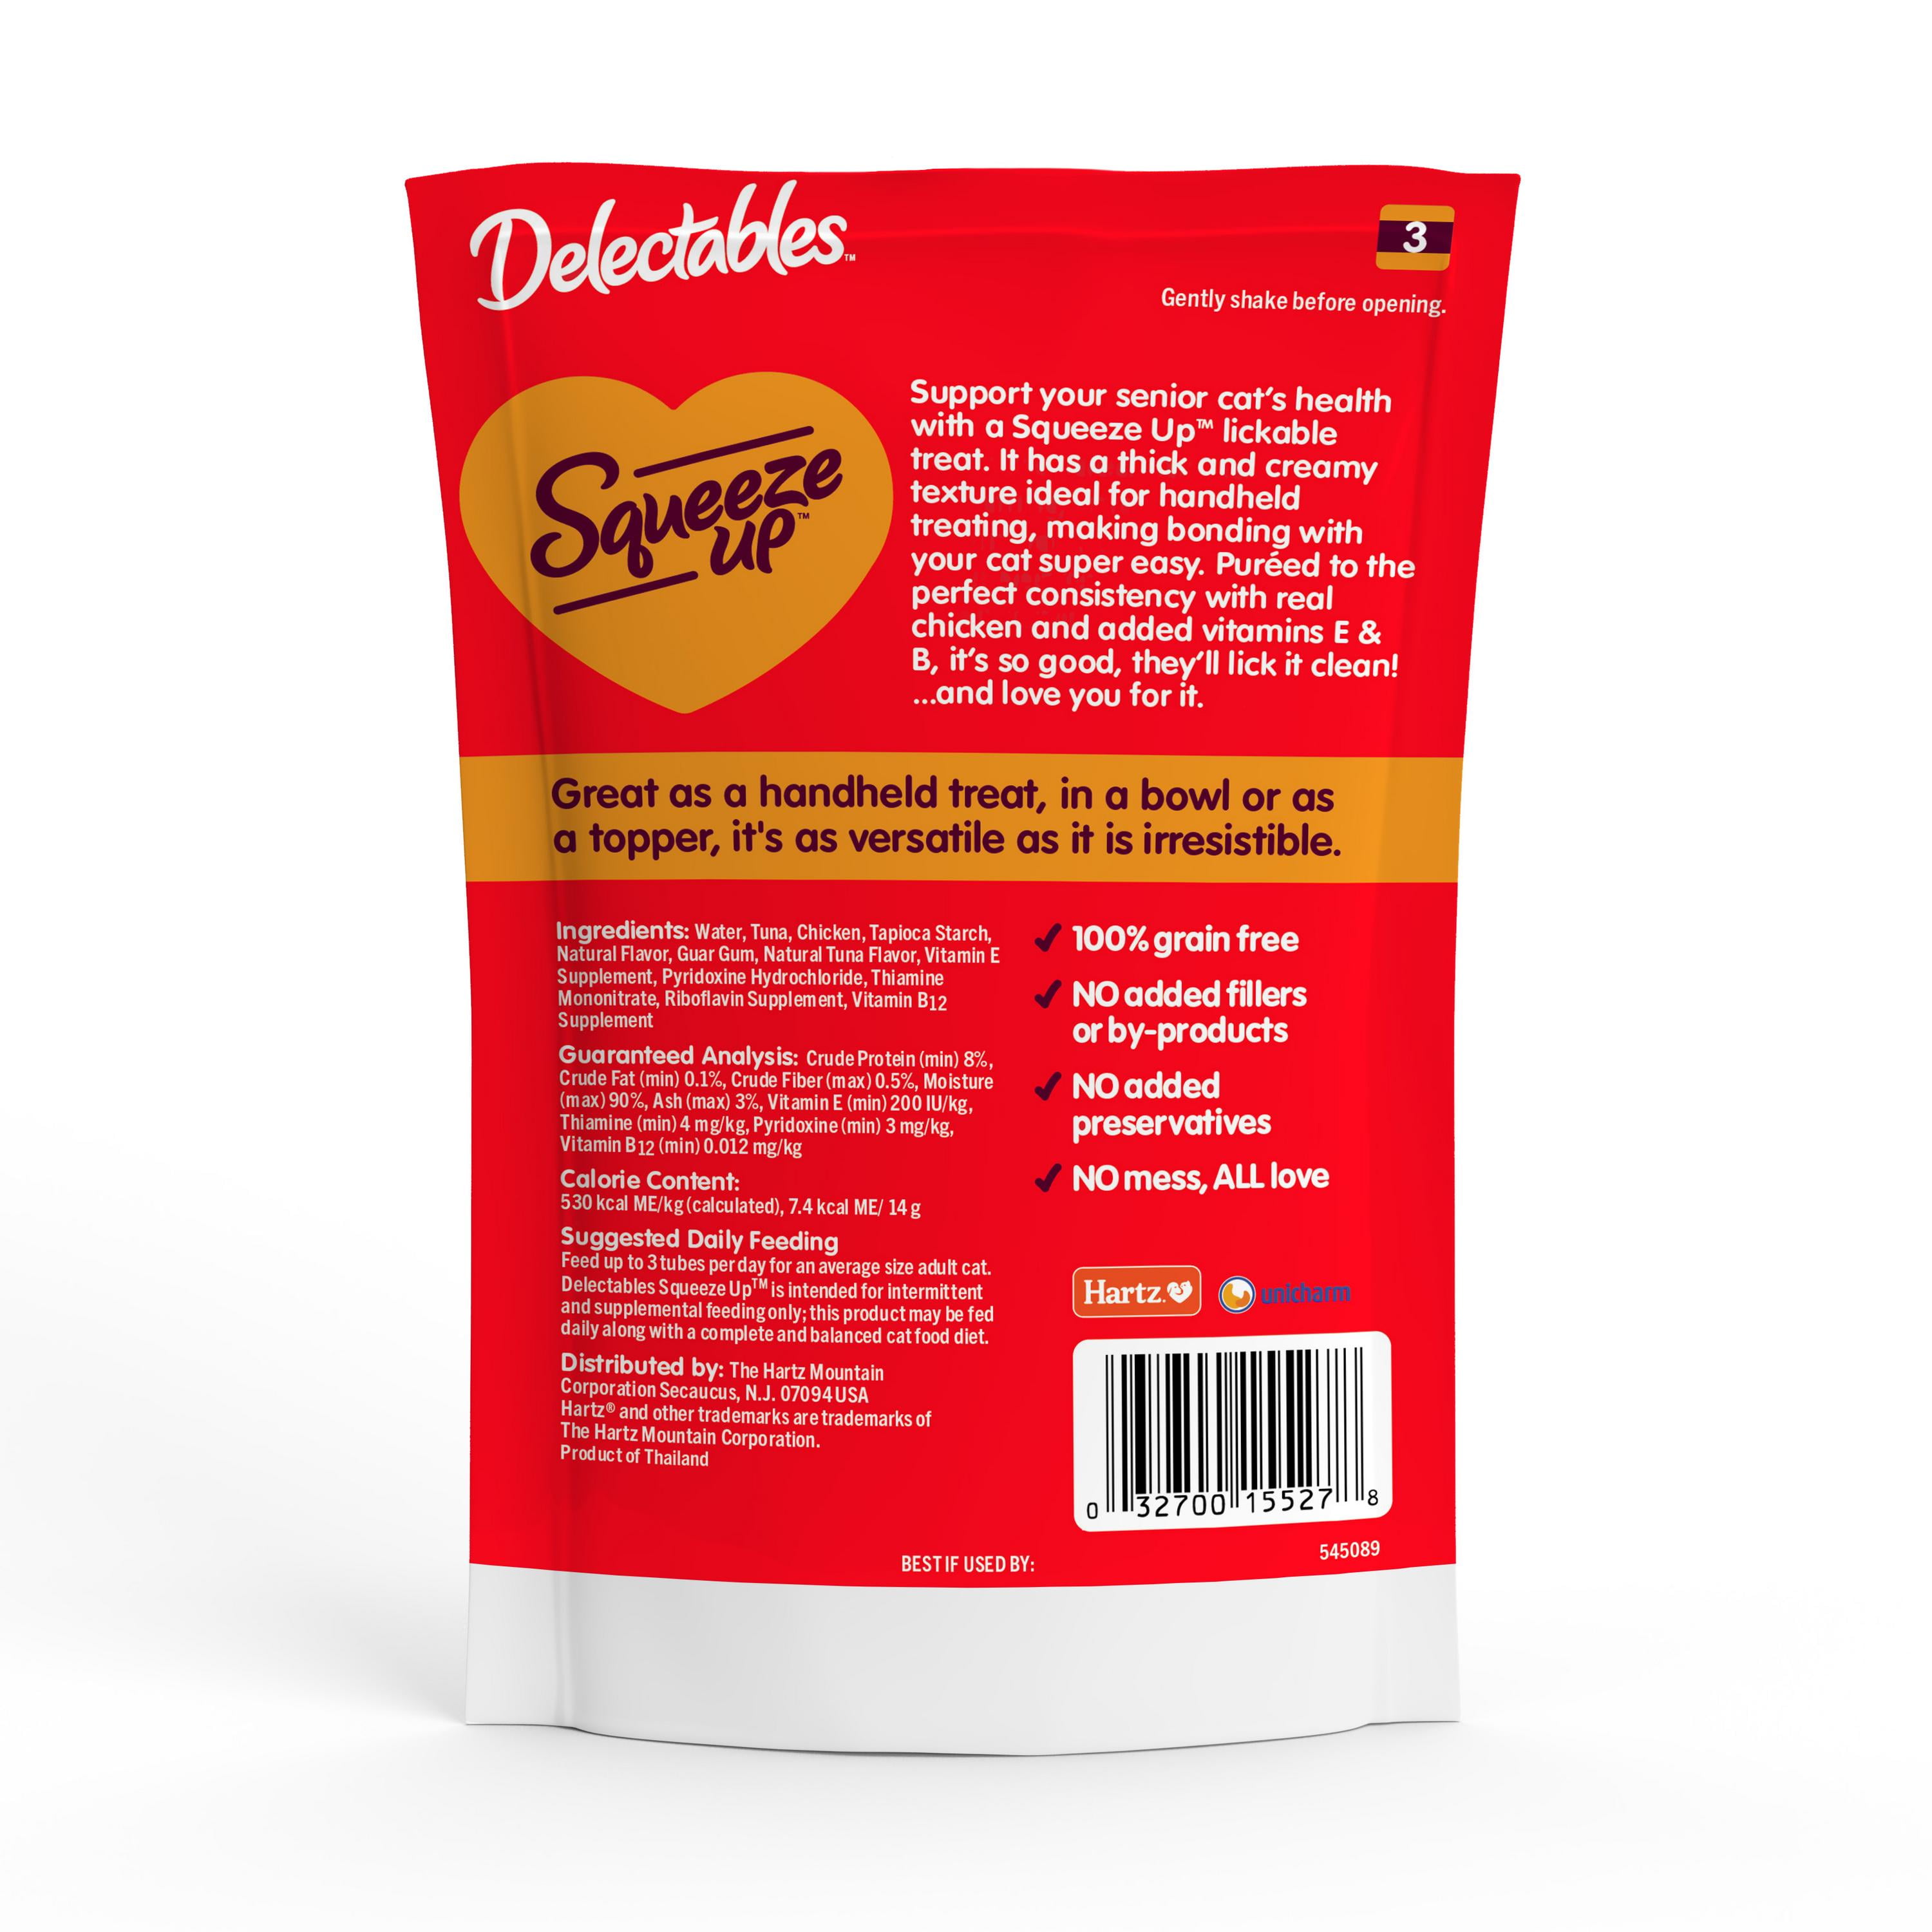 50 Pack Duzzit Leather Cleaning Wipes - Buy Online at QD Stores